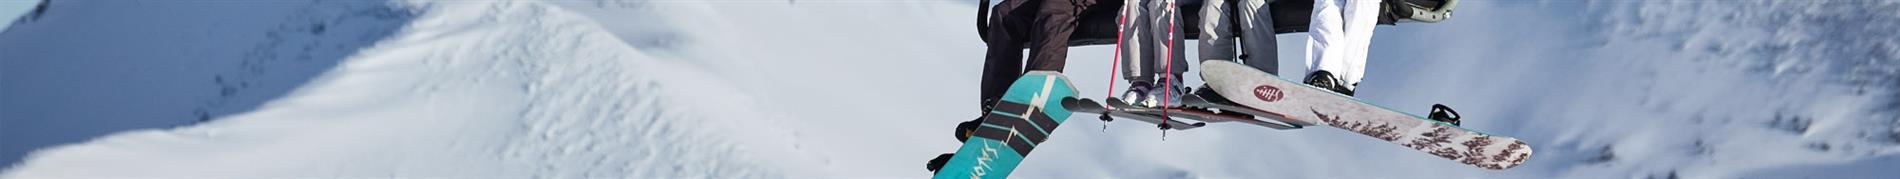 Polar Pro Women's skis, snowboards, and accessories for everything snow. 